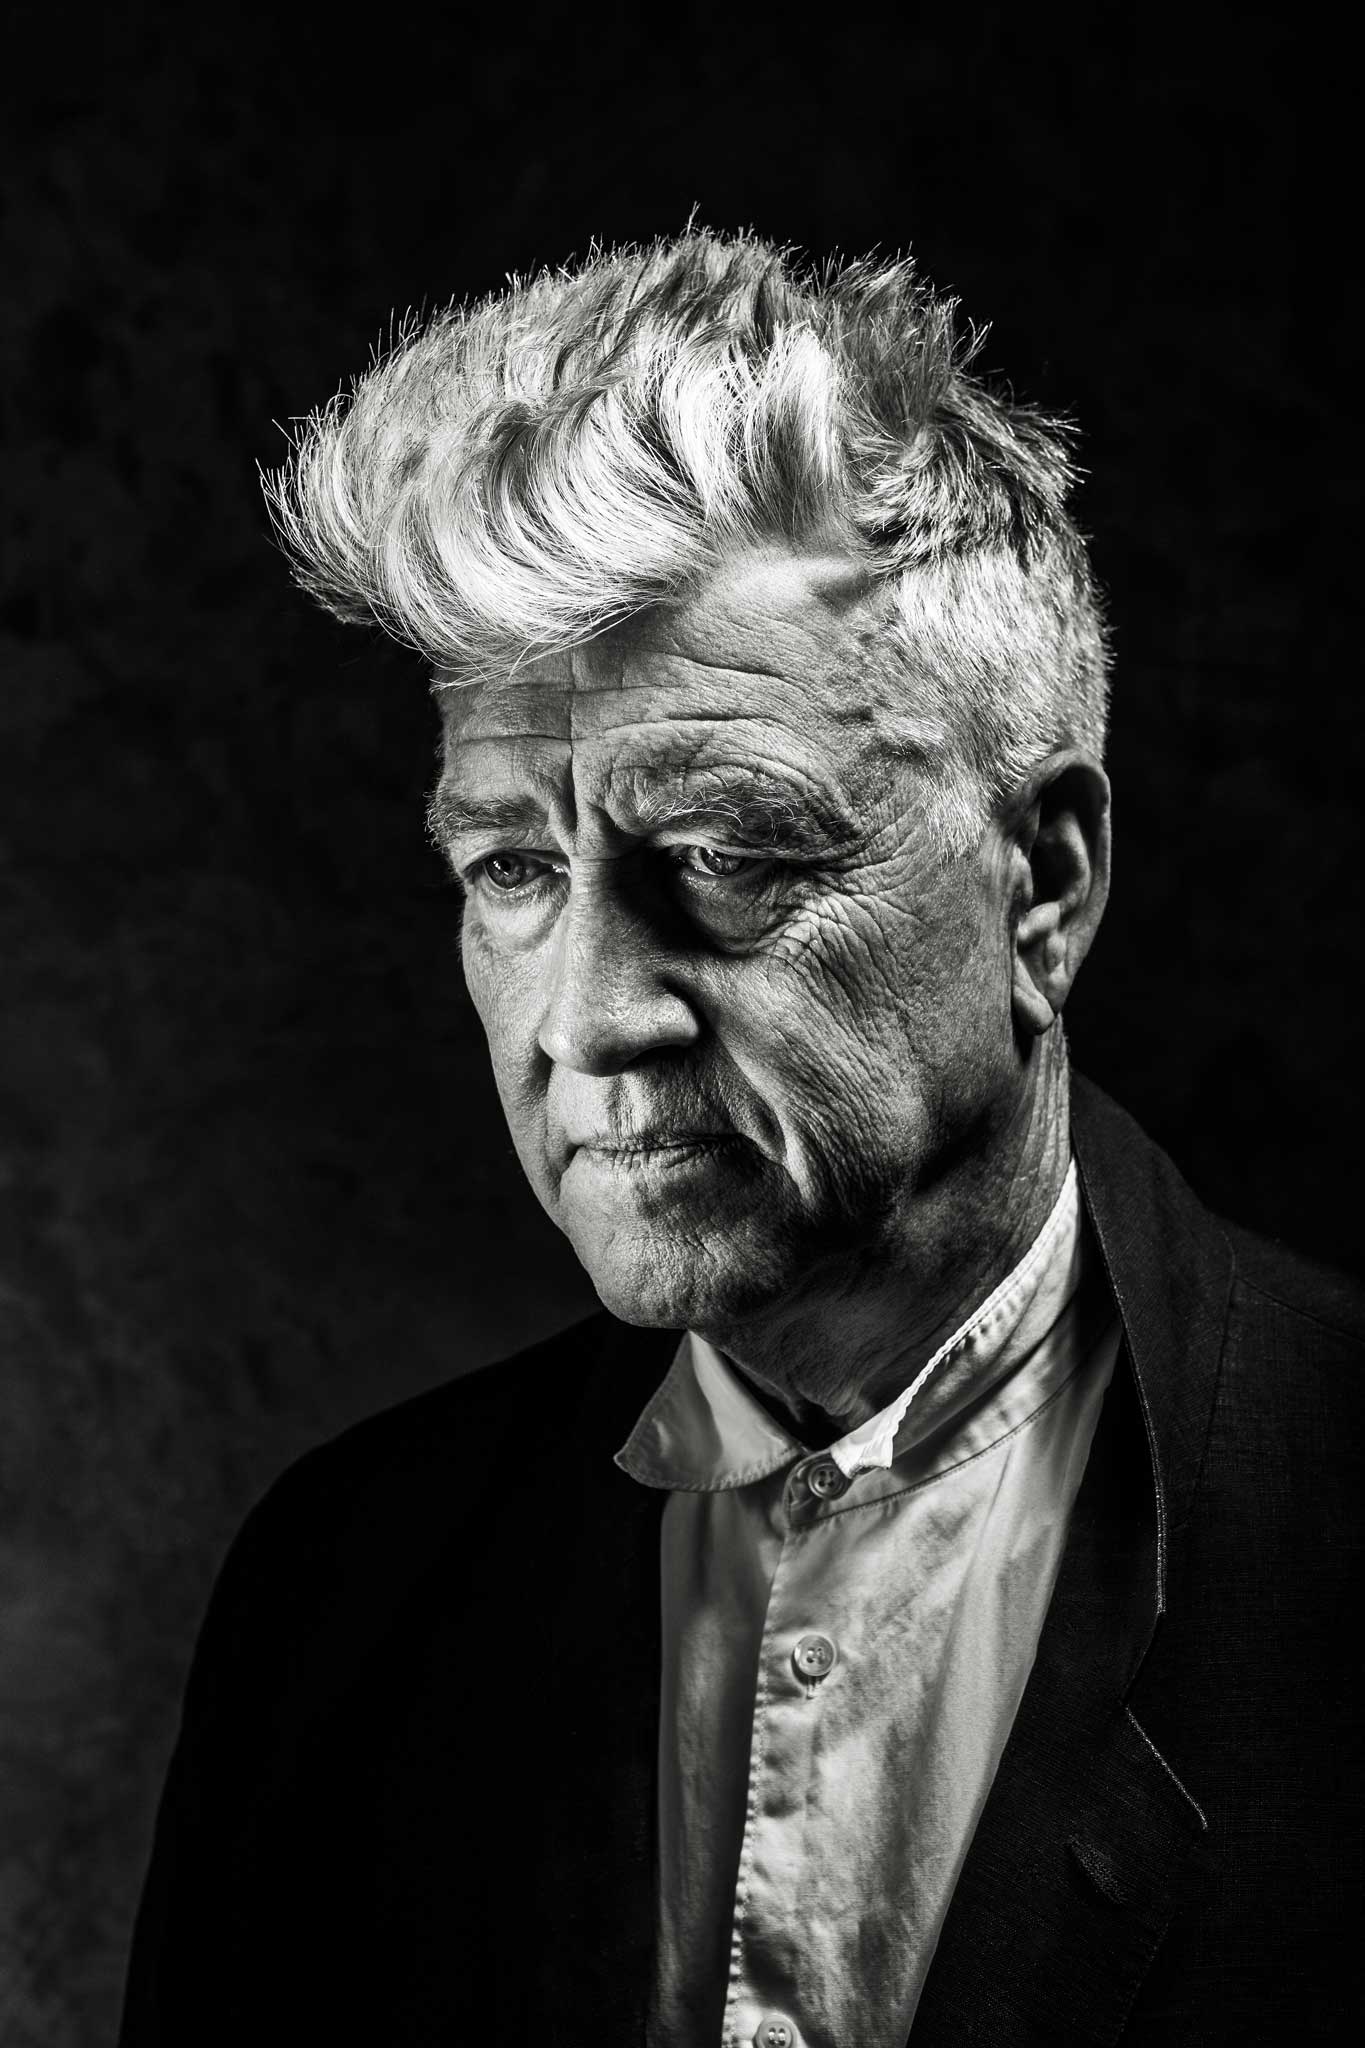 Lynch hasn't directed a movie in almost a decade and seems doubtful he'll ever make a feature film again: 'My ideas are not what you'd call commercial, and money really drives the boat these days.'